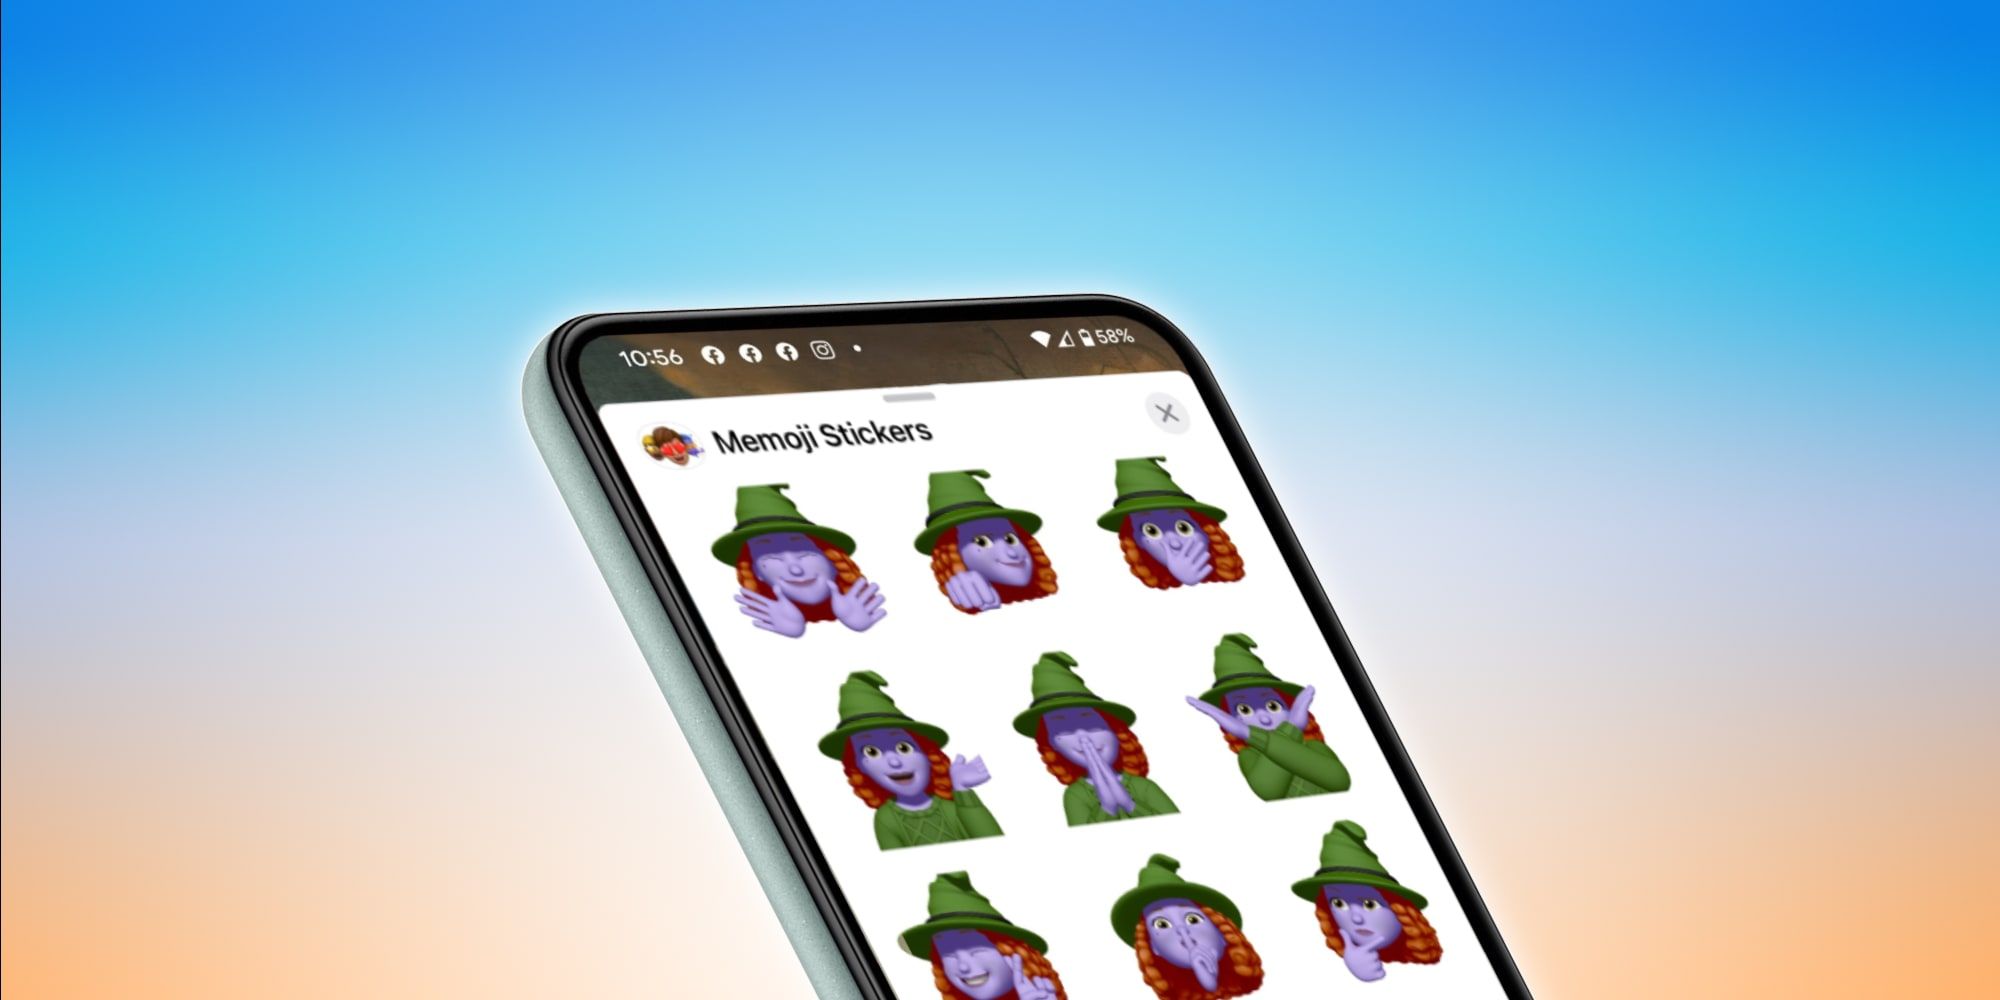 Google Pixel 5 Android Phone With Memoji On-Screen